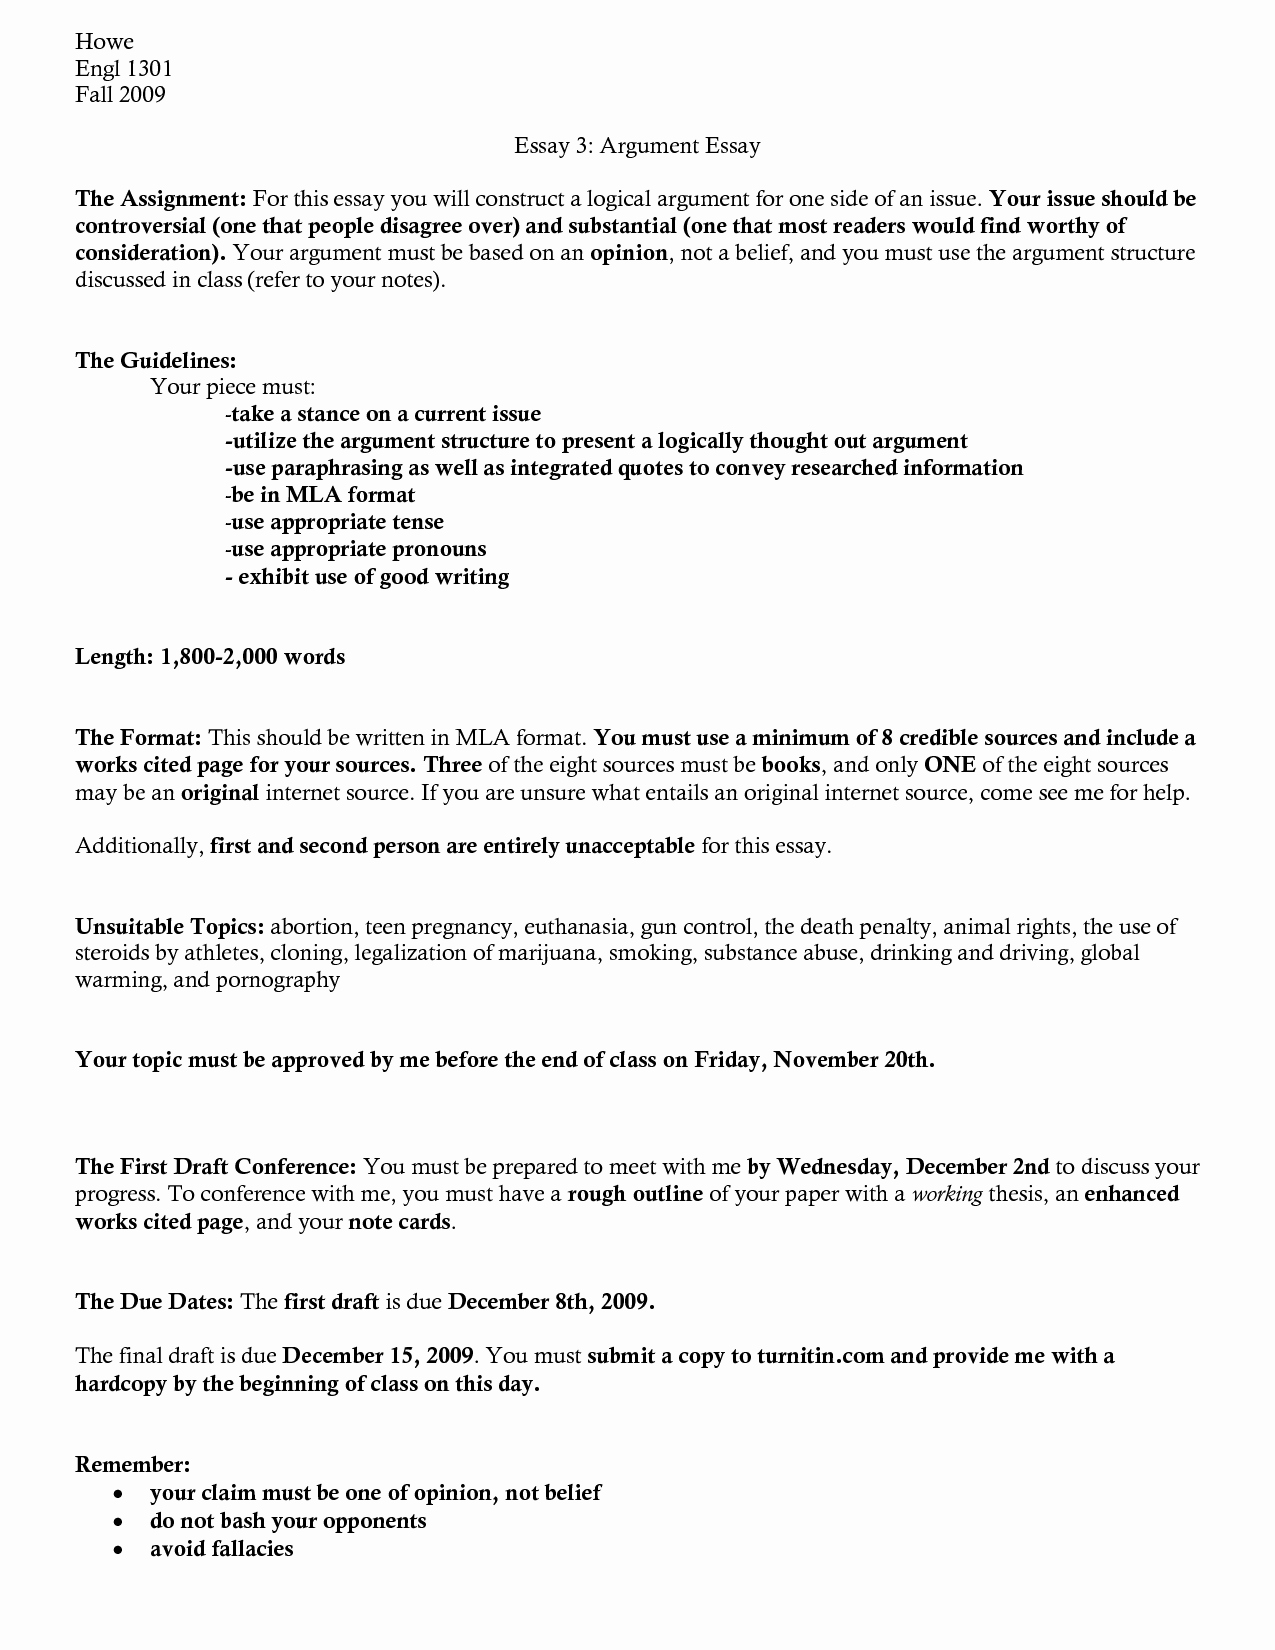 Archaeology resume msword